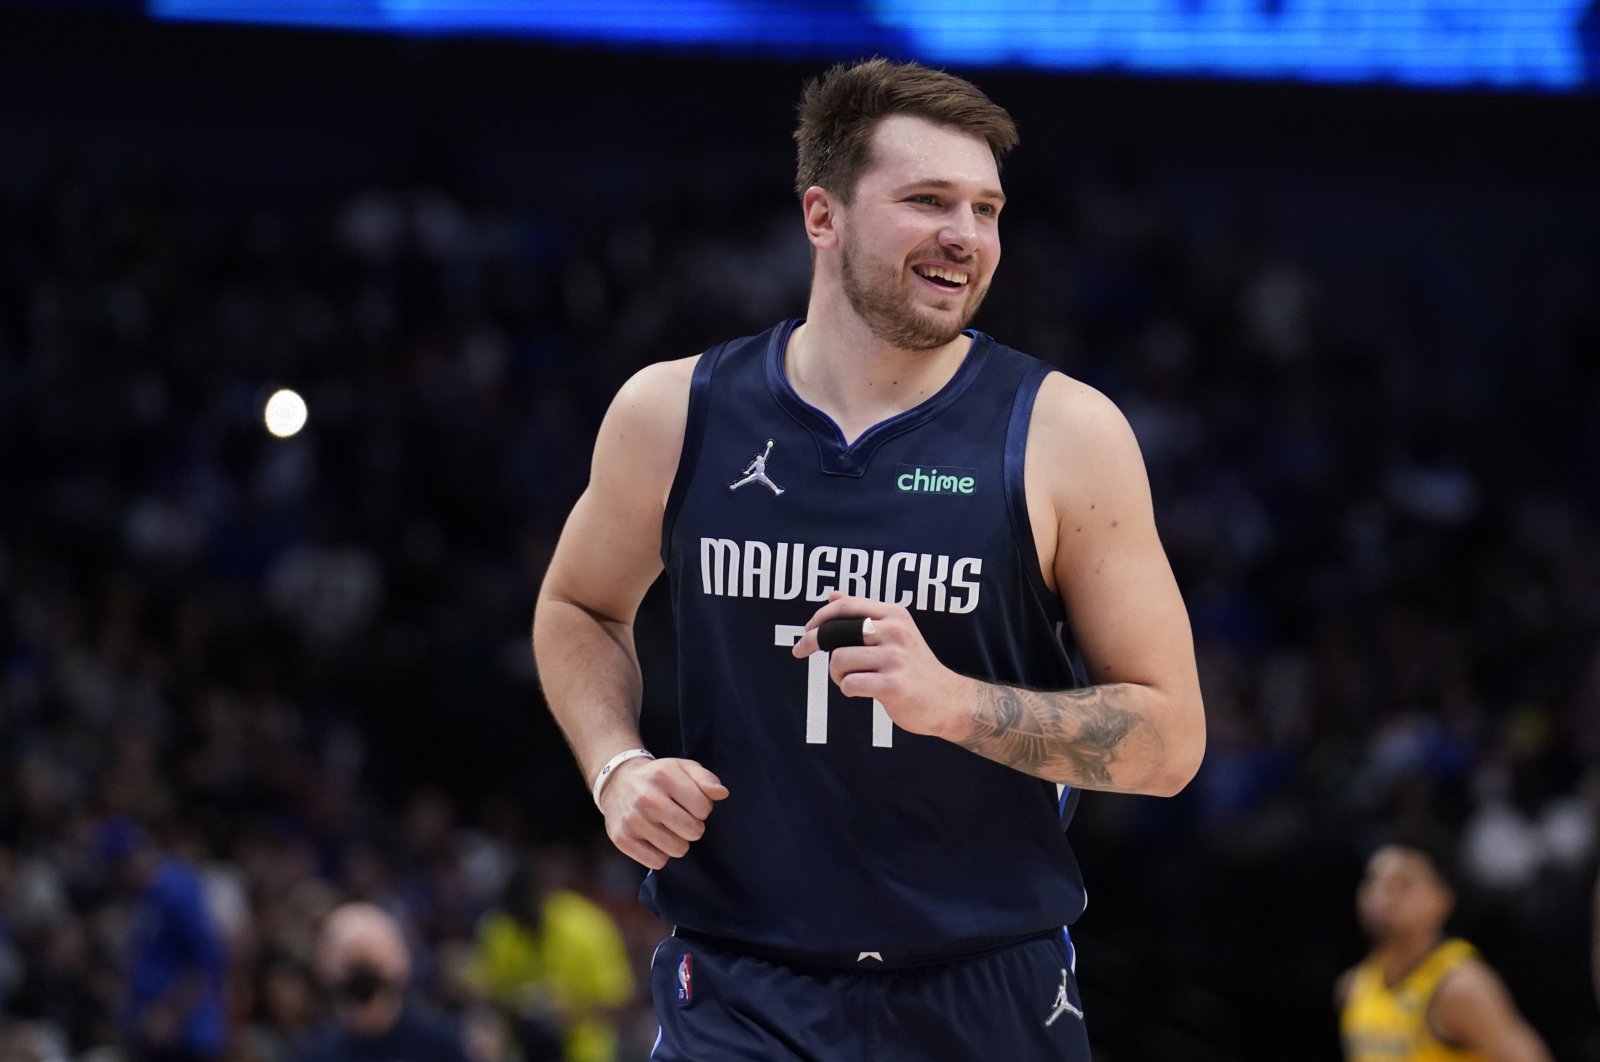 Dallas Mavericks guard Luka Doncic (77) smiles as he jogs up court after sinking a basket in the second half of an NBA basketball game against the Indiana Pacers in Dallas, U.S., Jan. 29, 2022. (AP Photo)